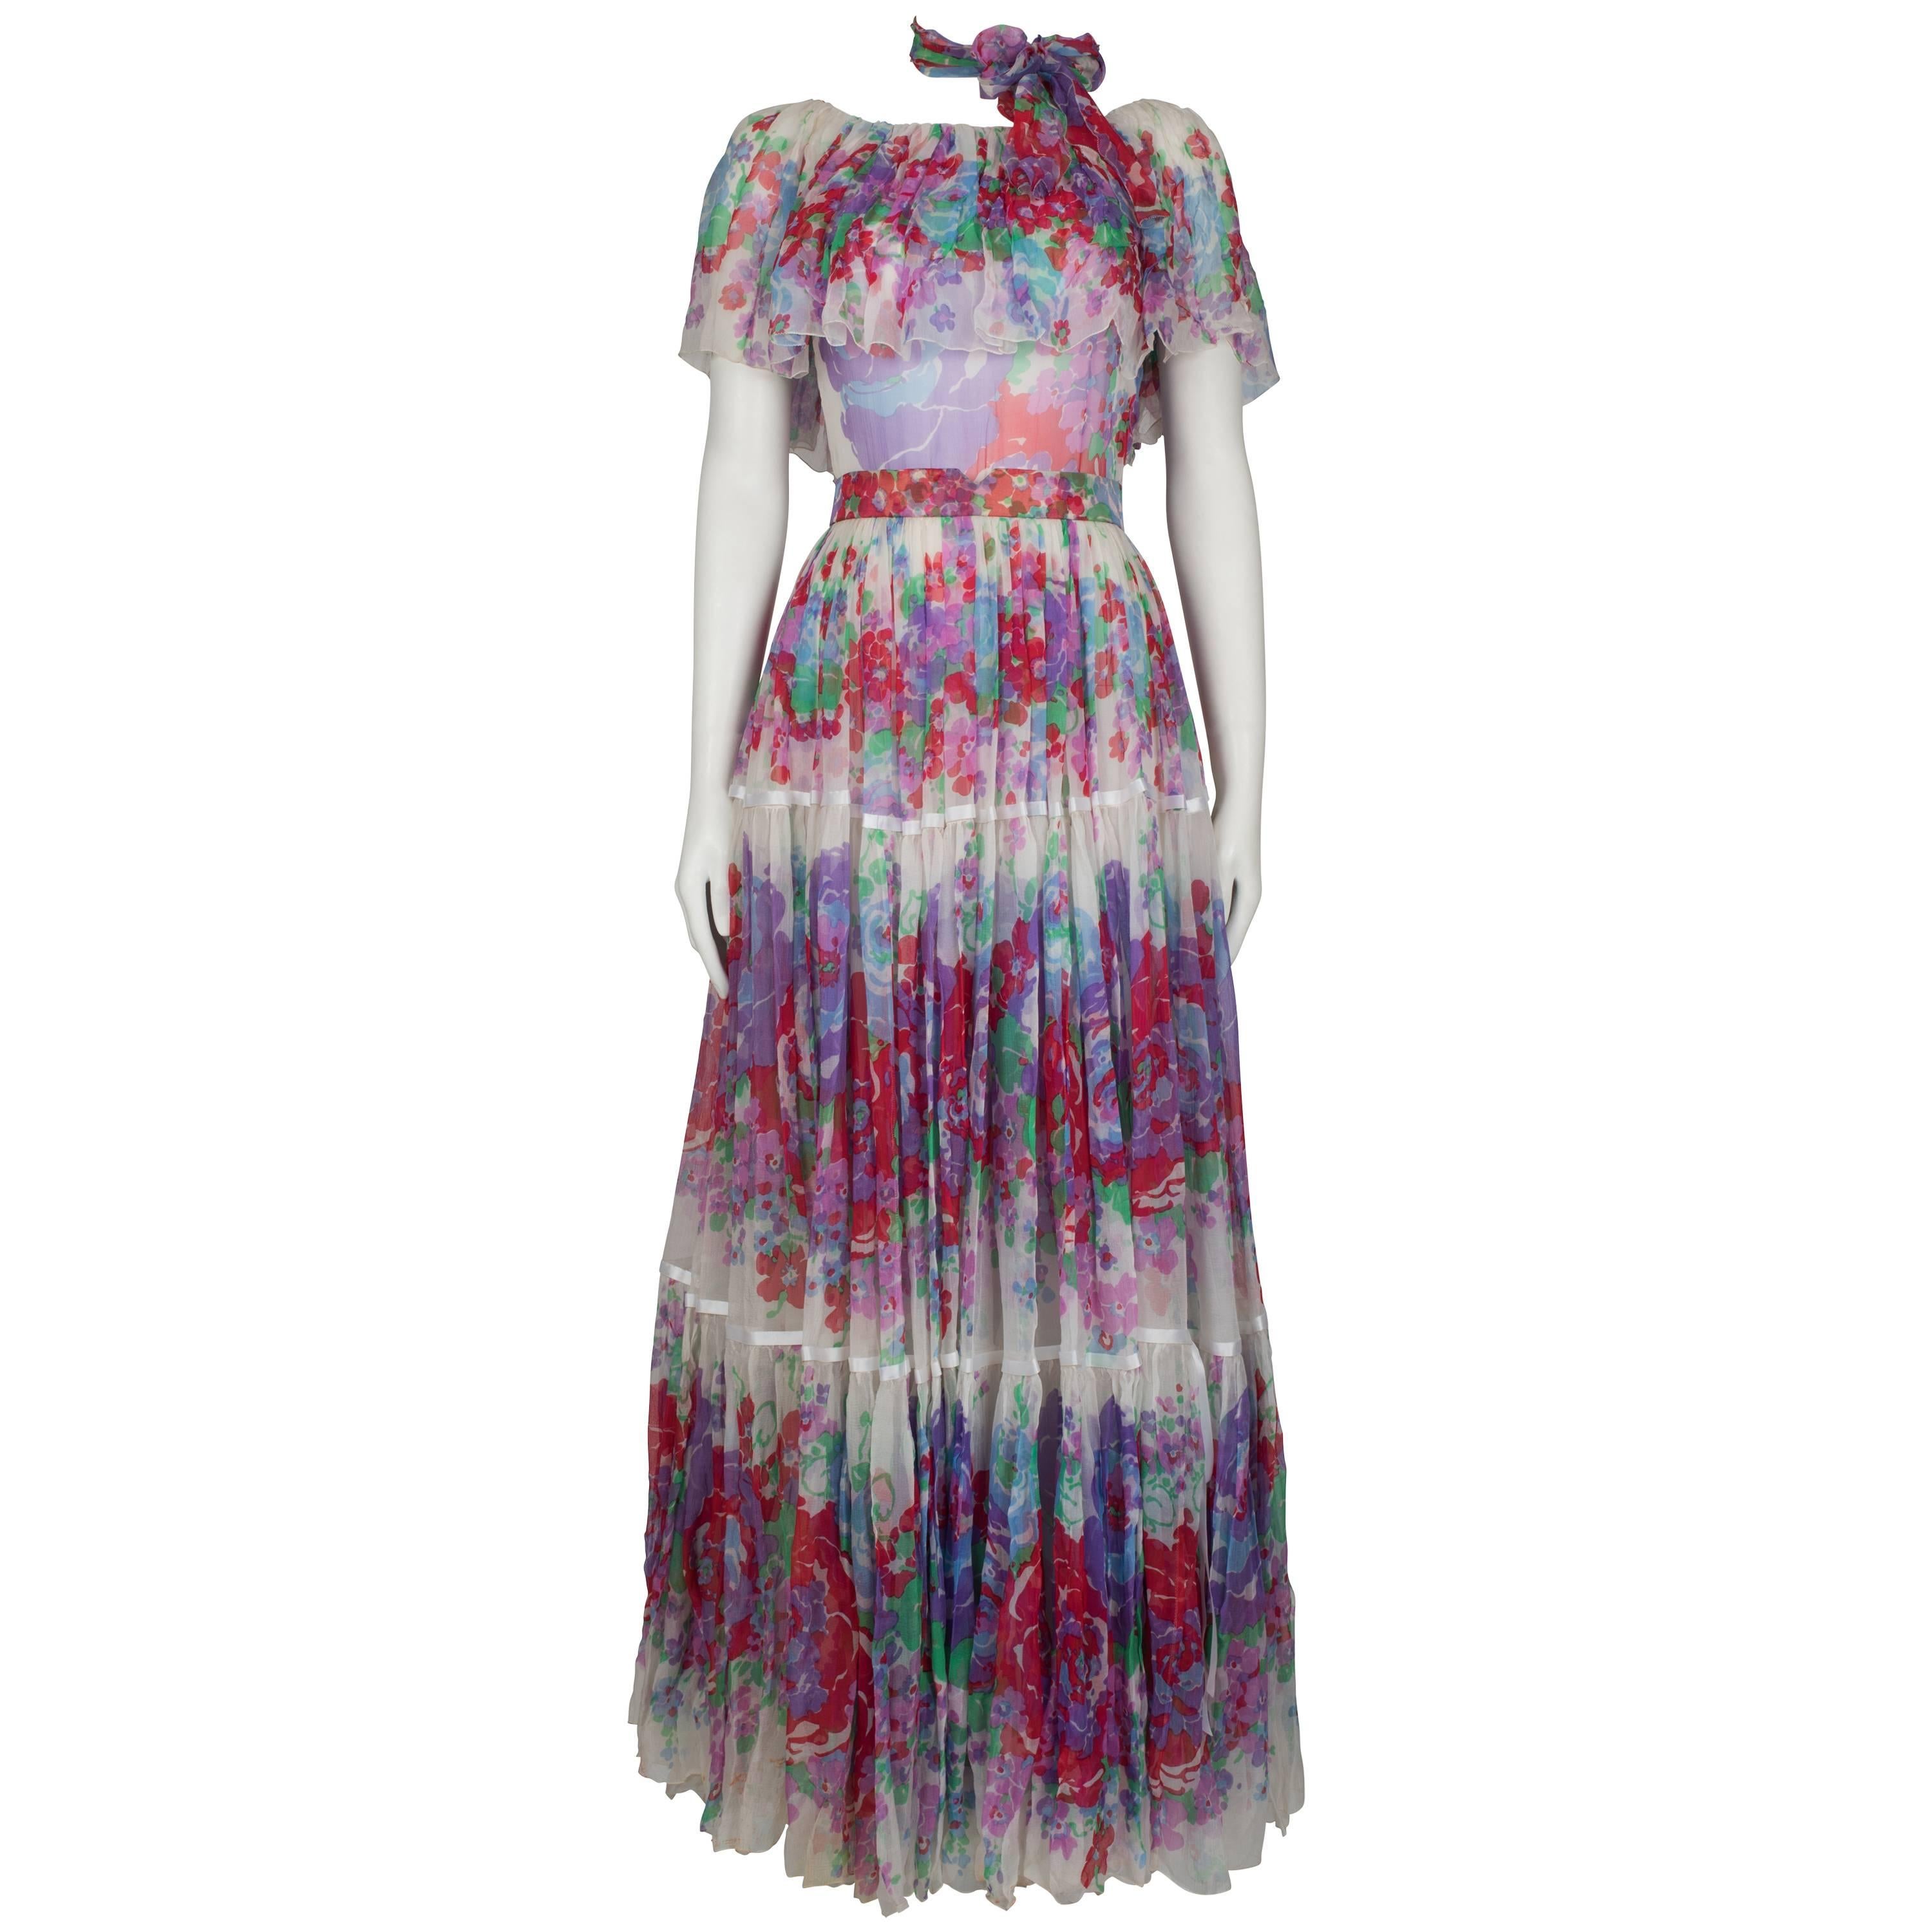 Harald lilac and red floral tiered dress ca 1970 For Sale